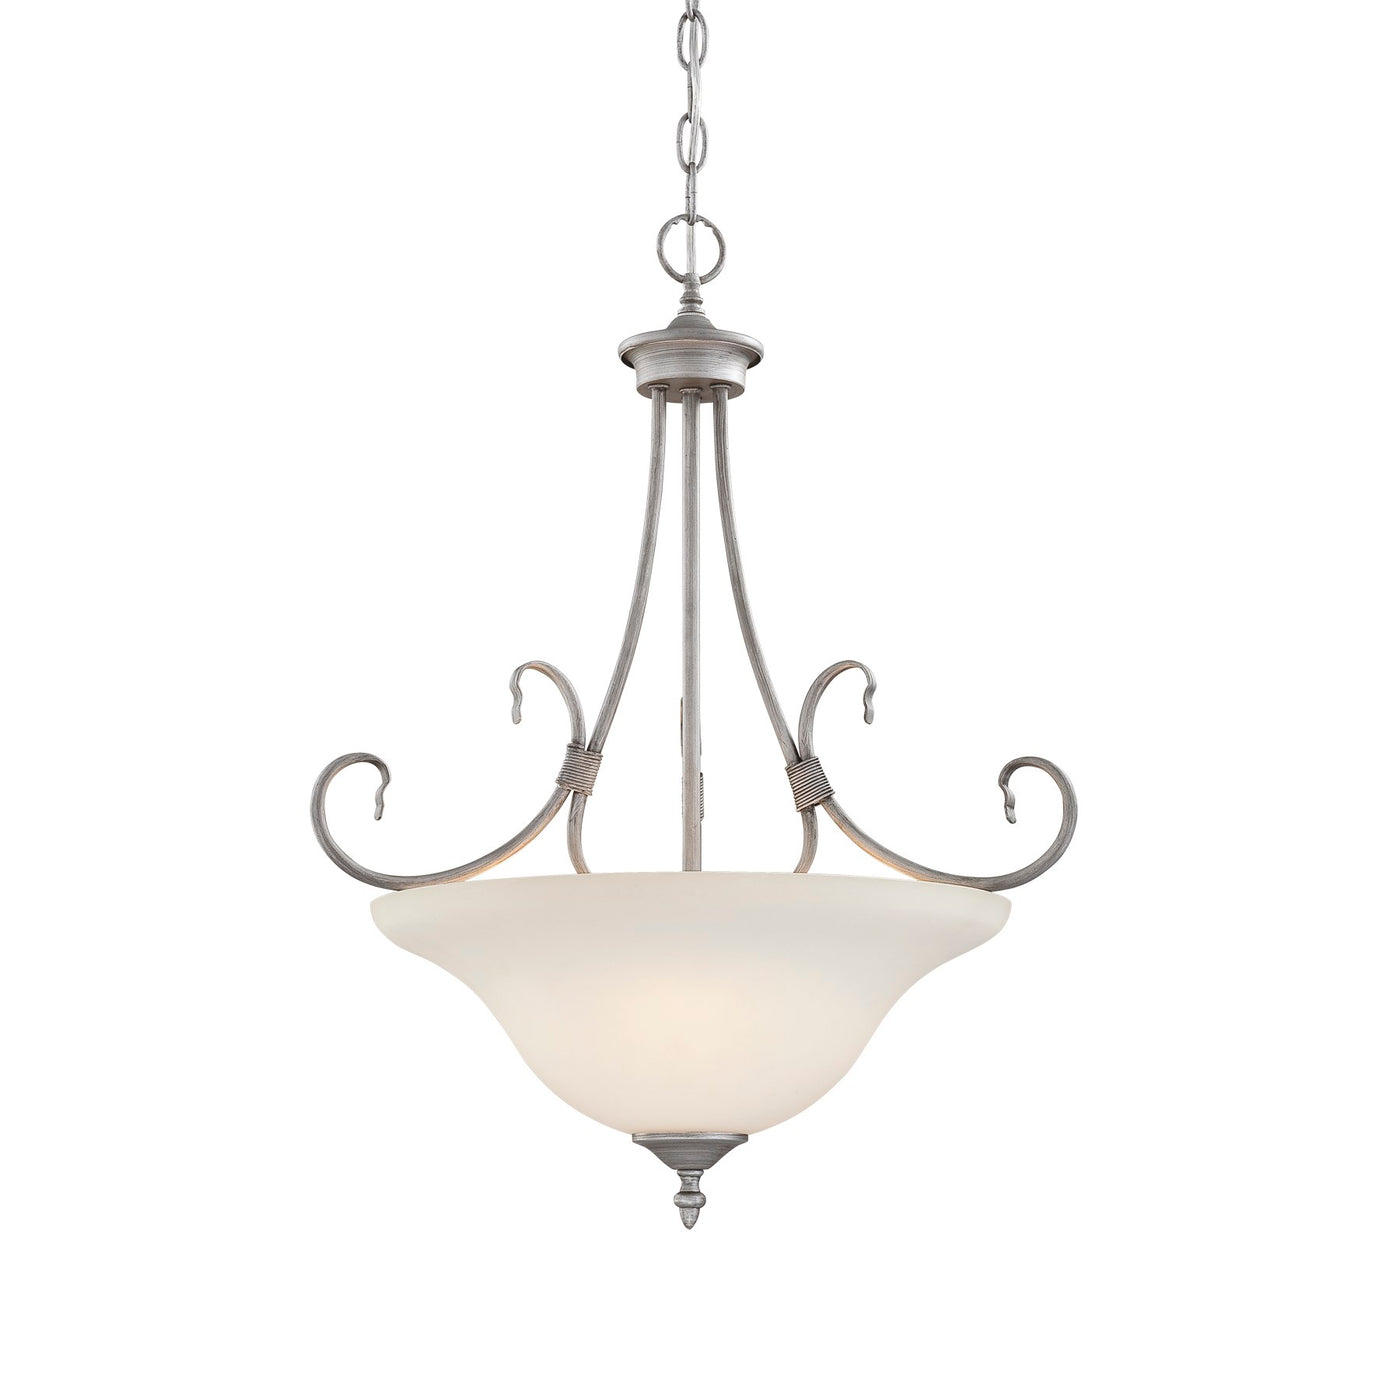 Millennium Lightings Fulton Pendant Offered in Rubbed Silver finish, Item Number 1383-RS